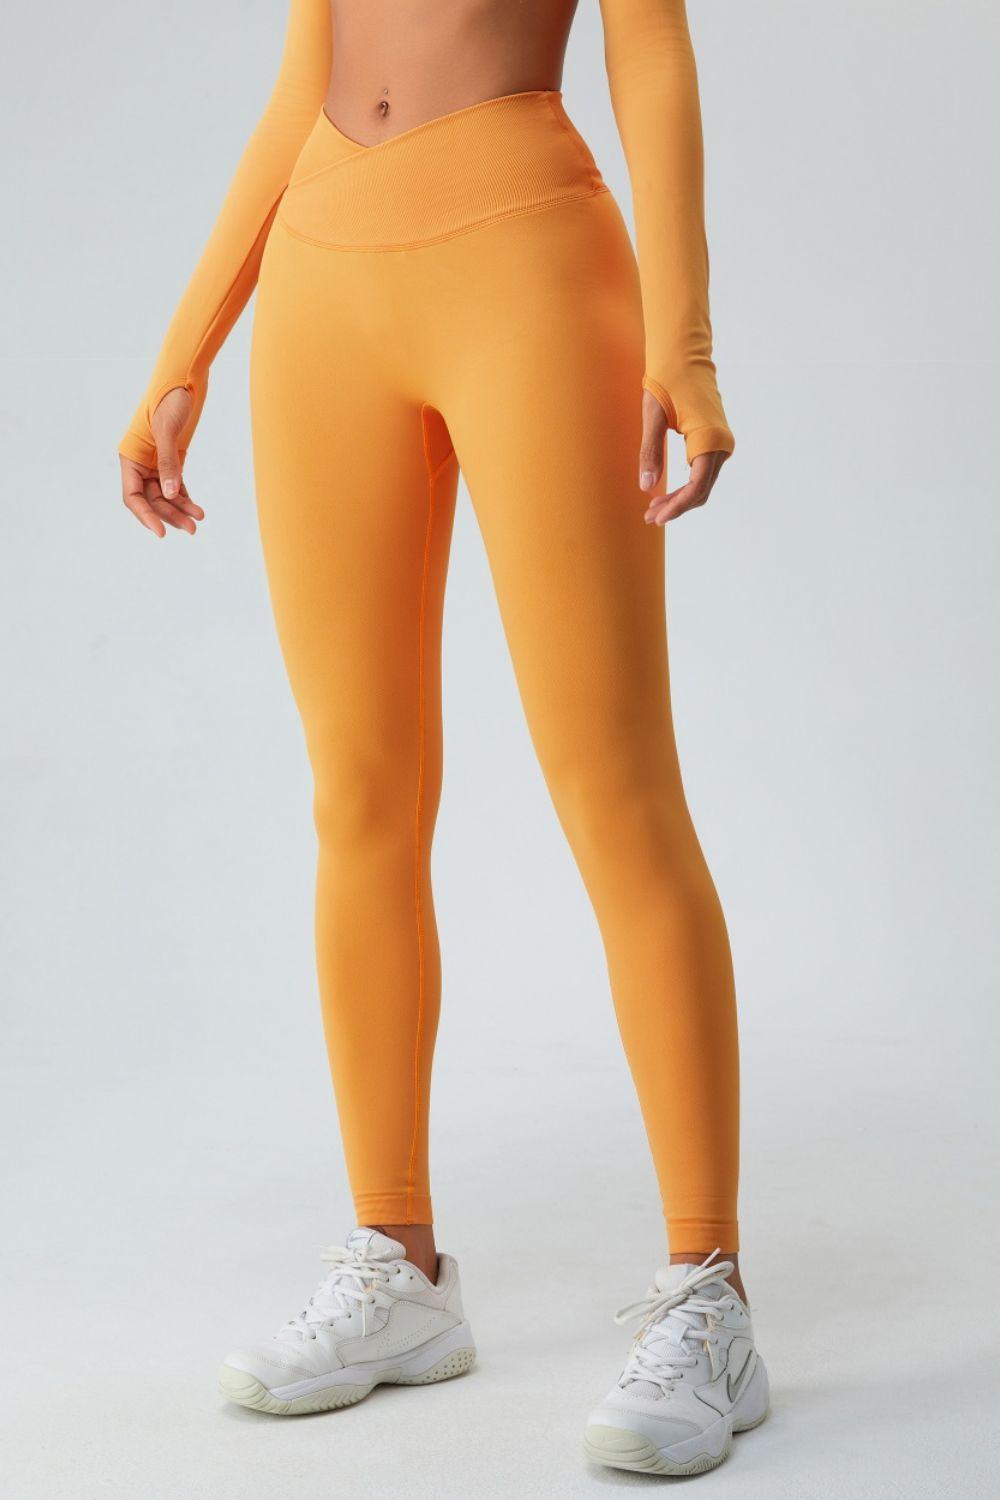 a woman in an orange sports bra top and leggings